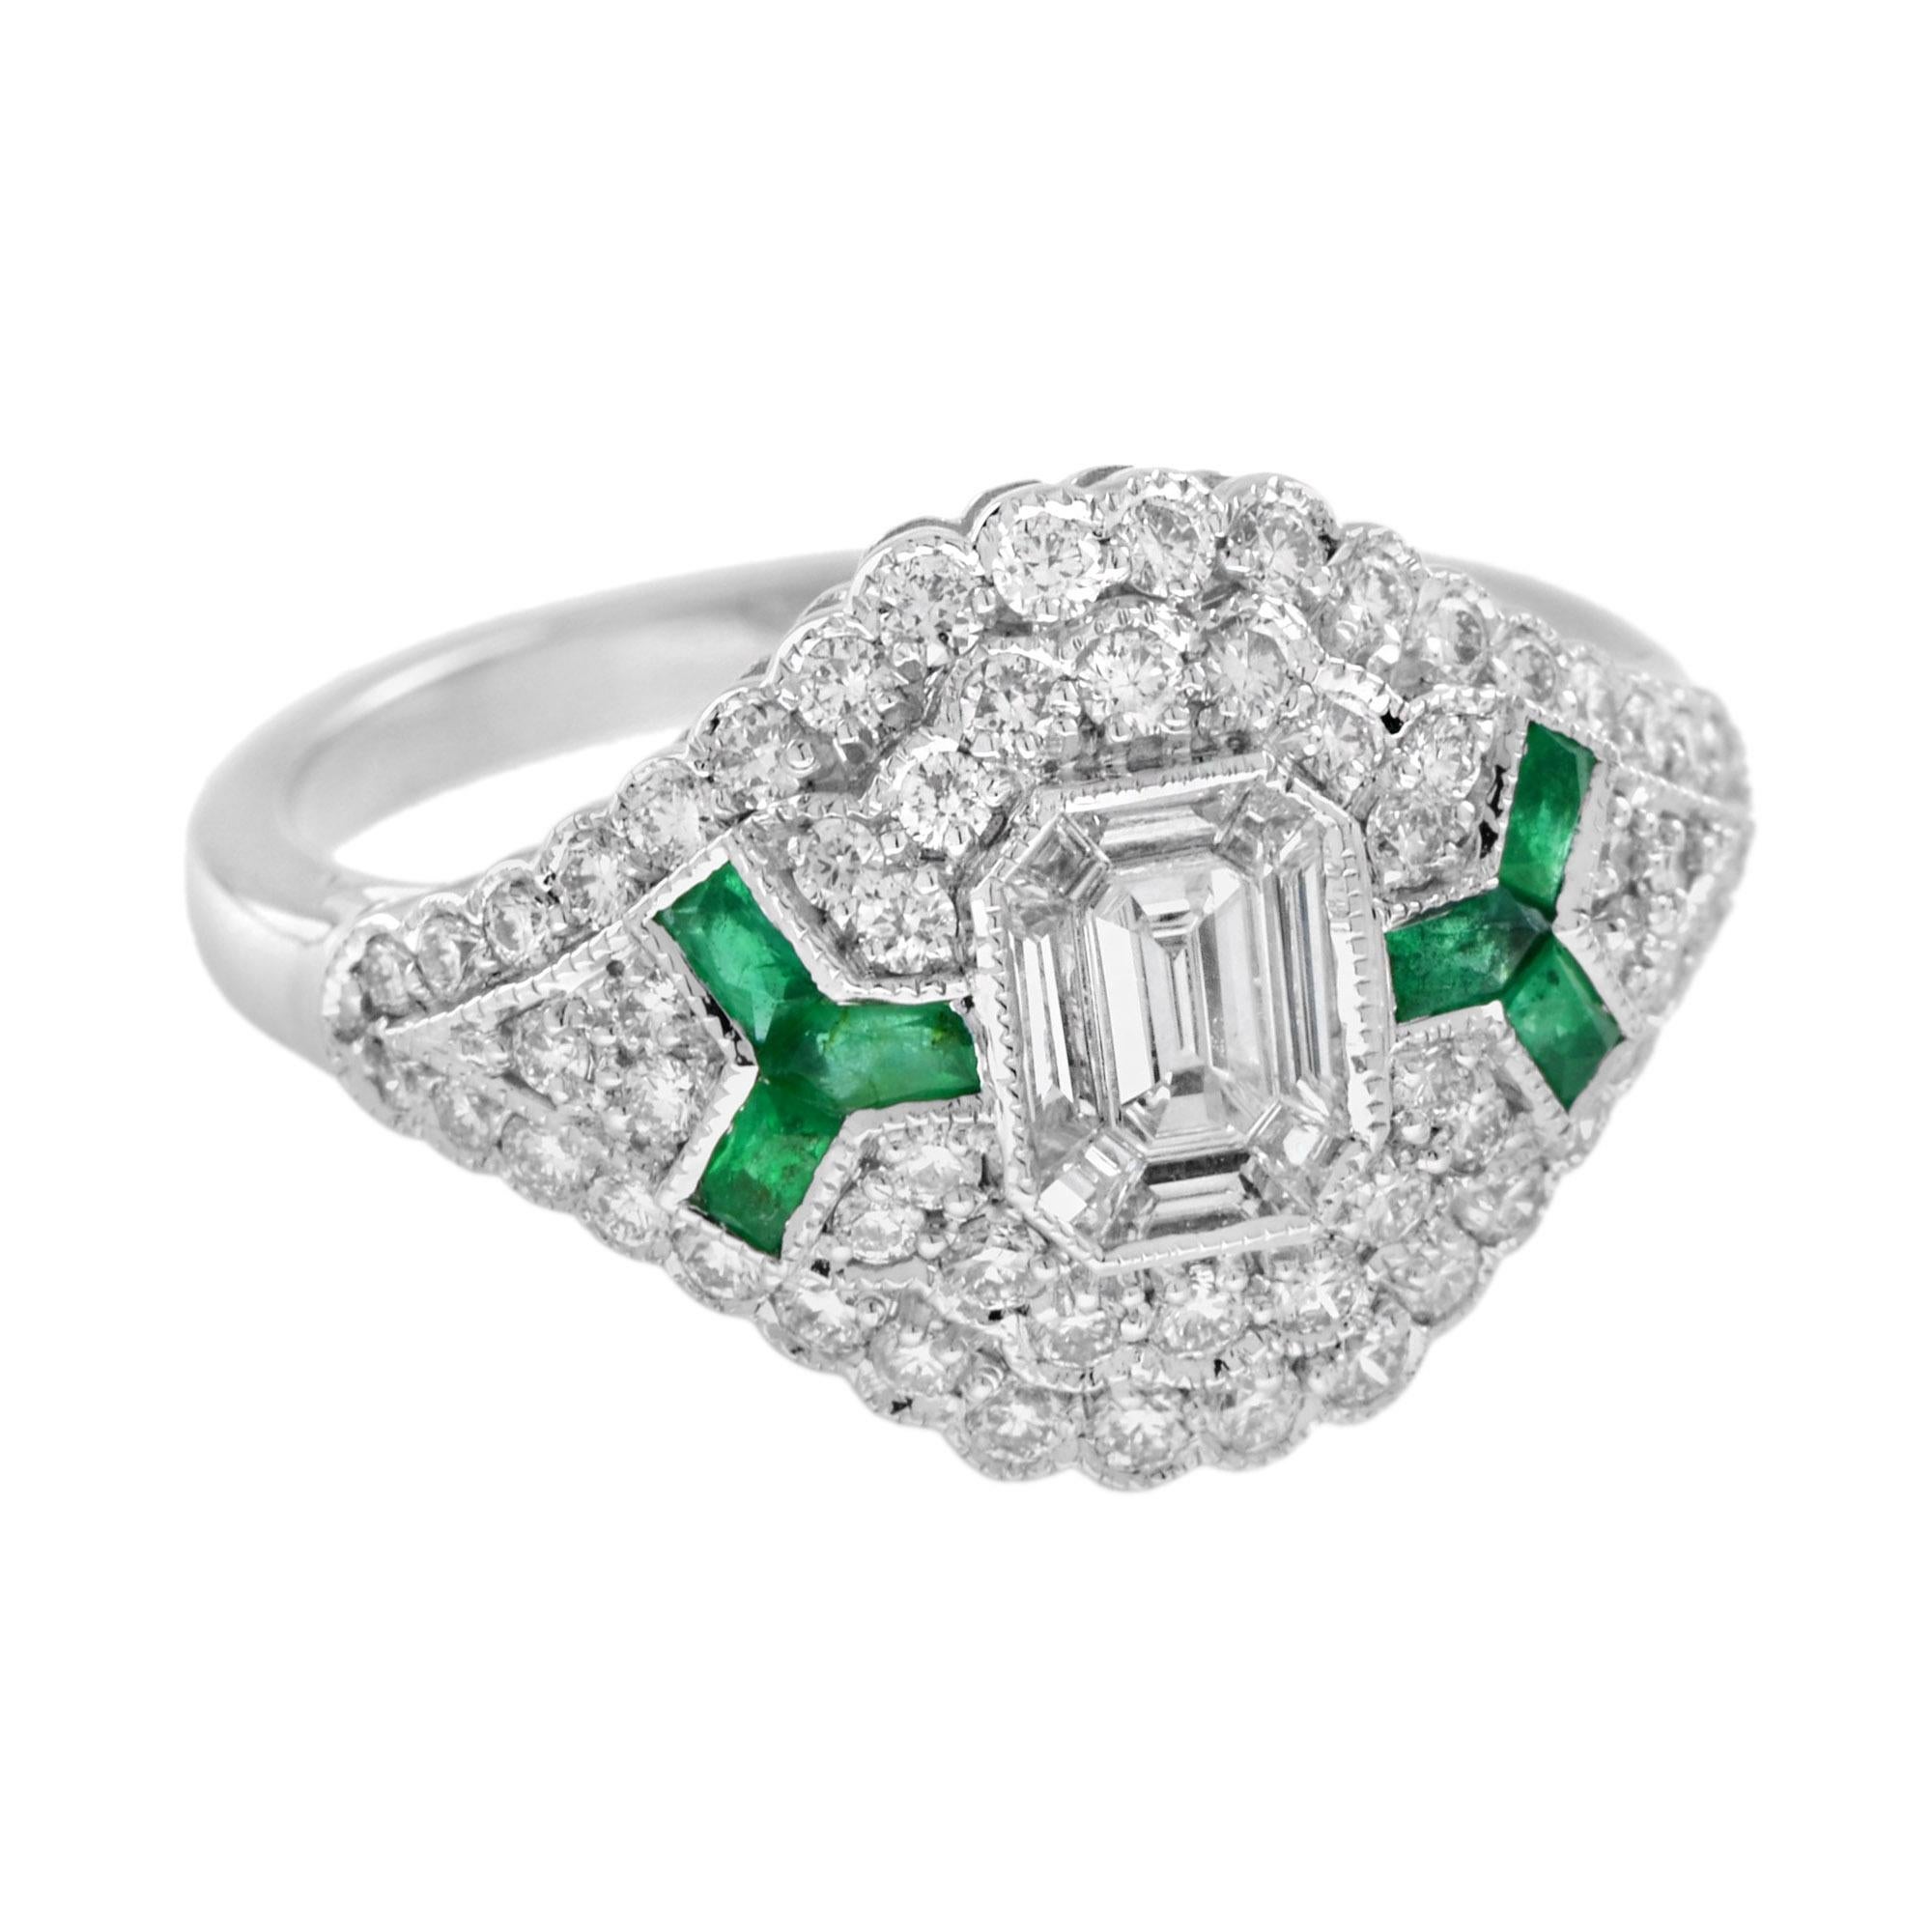 For Sale:  Emerald Cut Diamond and Emerald Art Deco Style Ring in 18K White Gold 3